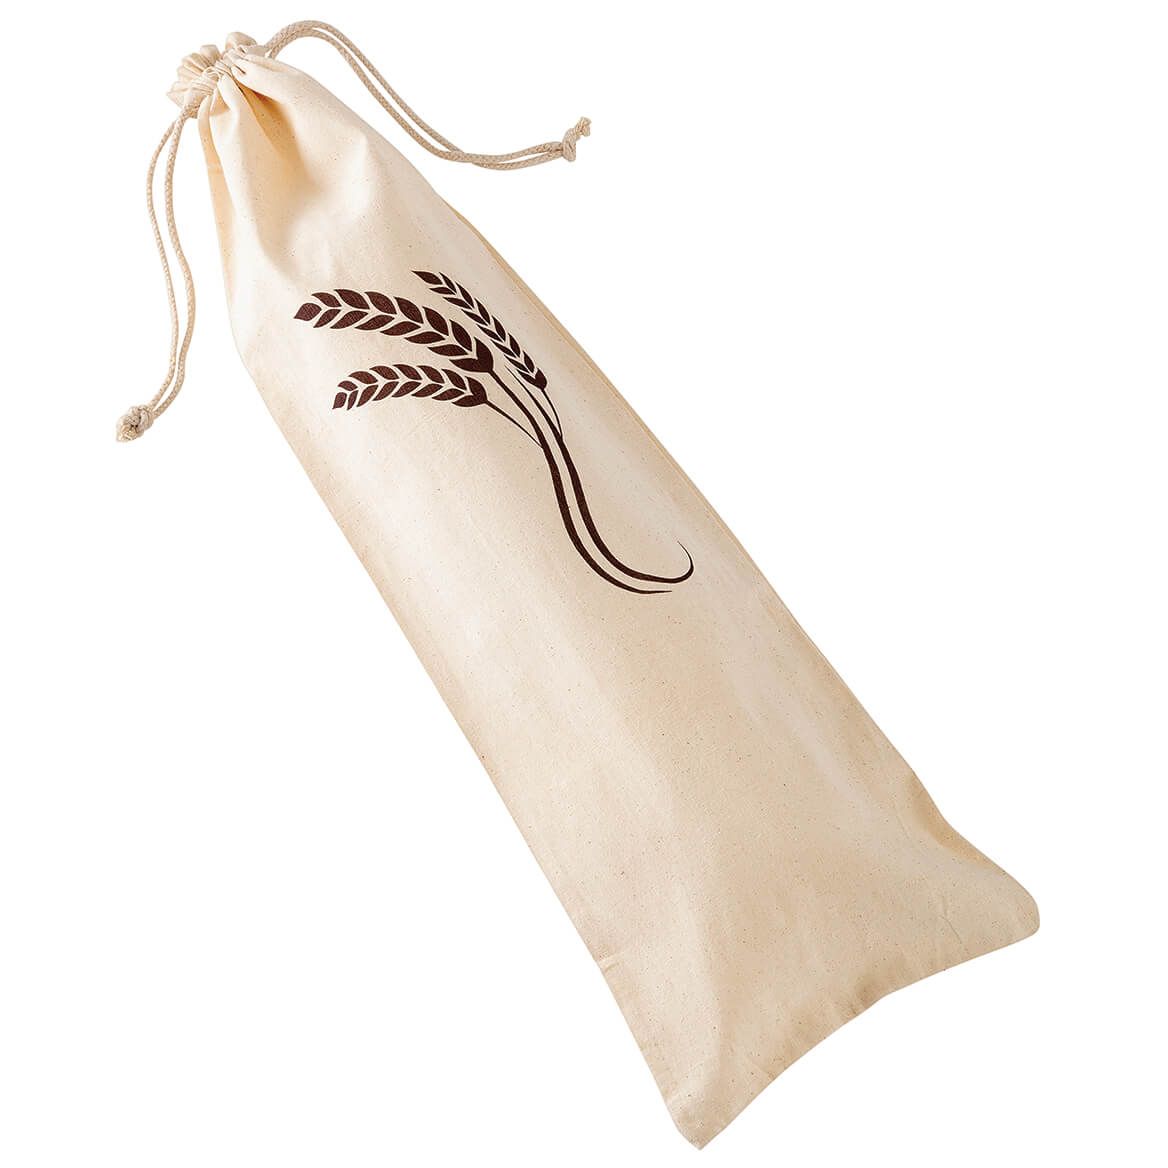 Baguette Bread Bag with Drawstring + '-' + 375140